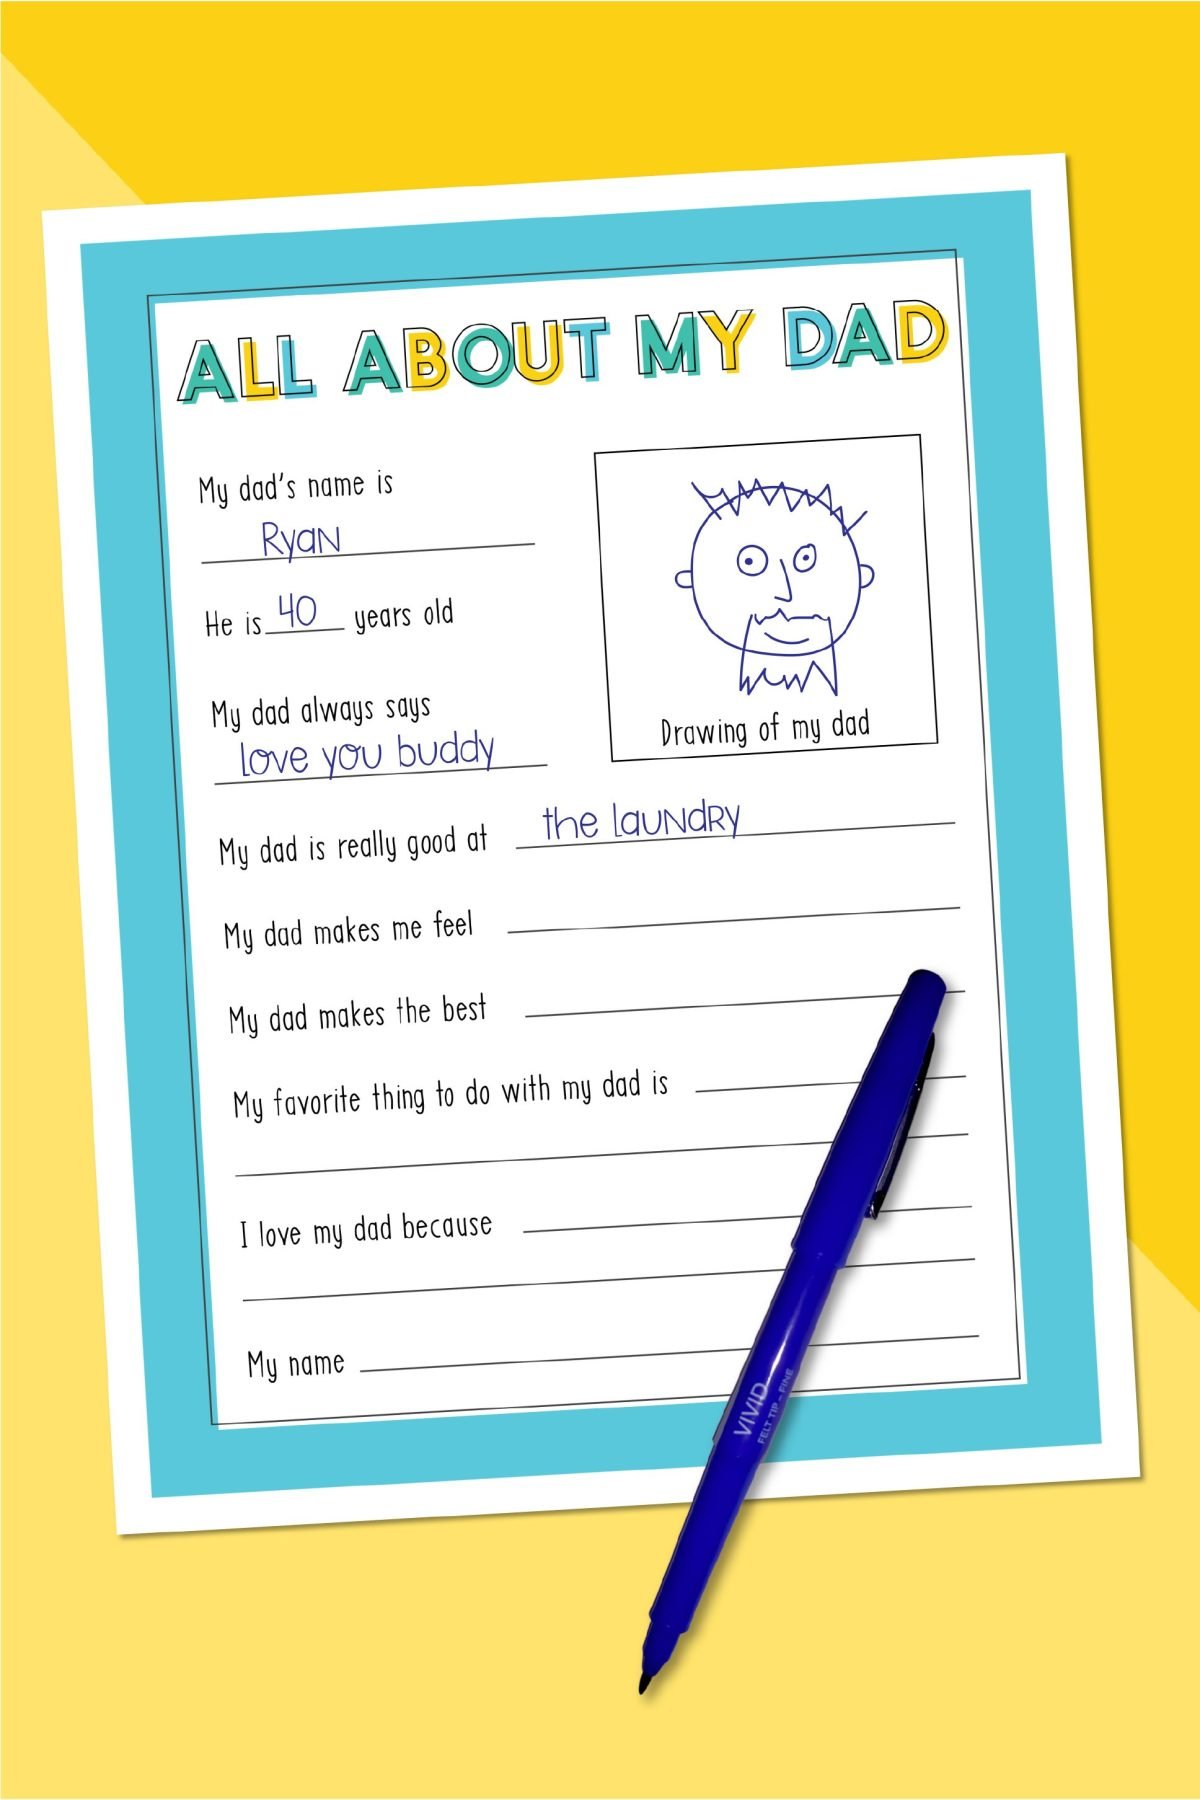 all-about-my-dad-pdf-printable-fathers-day-worksheet-for-kids-papa-uncle-fathers-day-fill-in-the